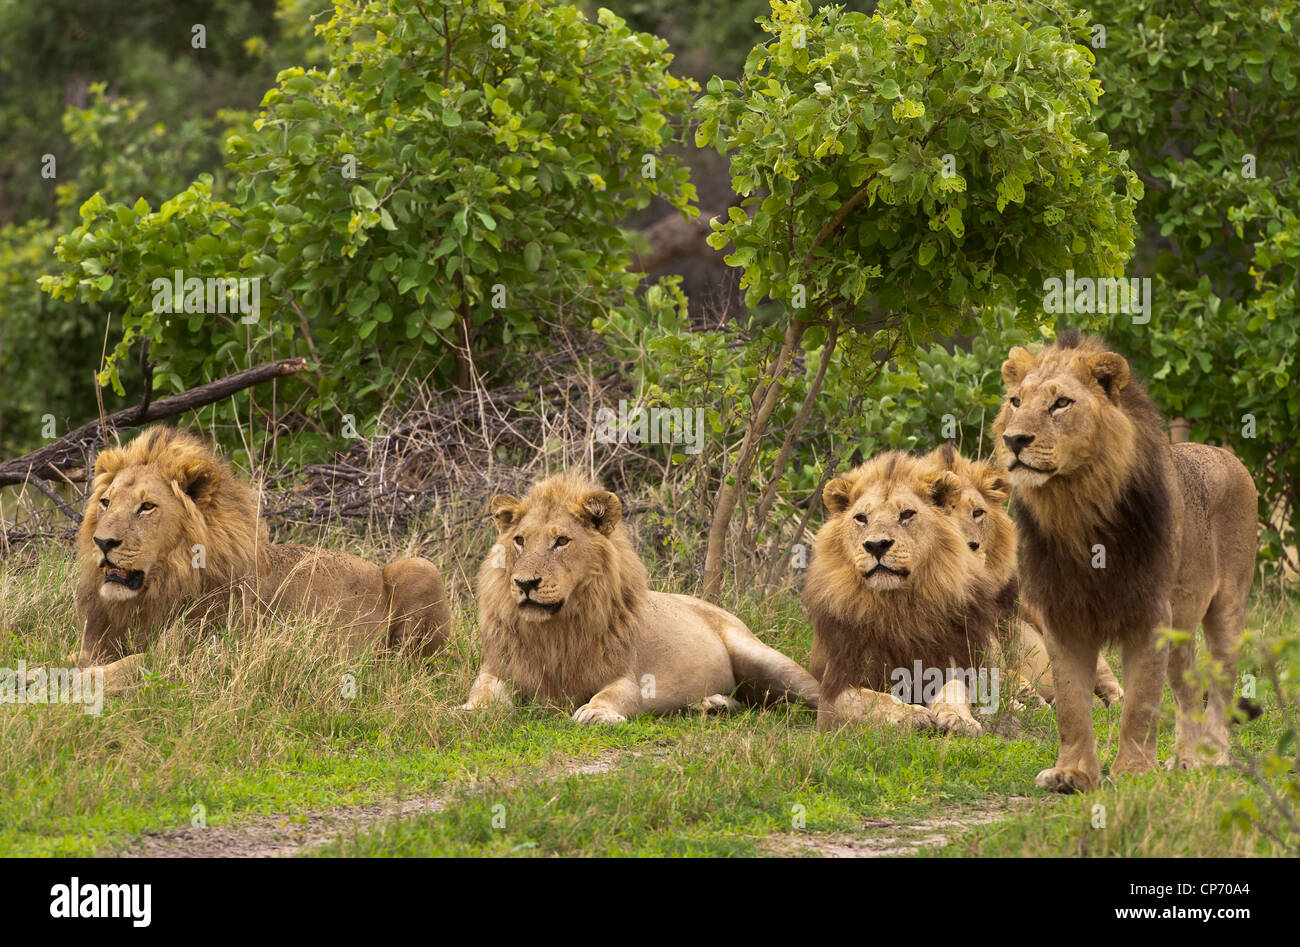 A Group Of Lions 98